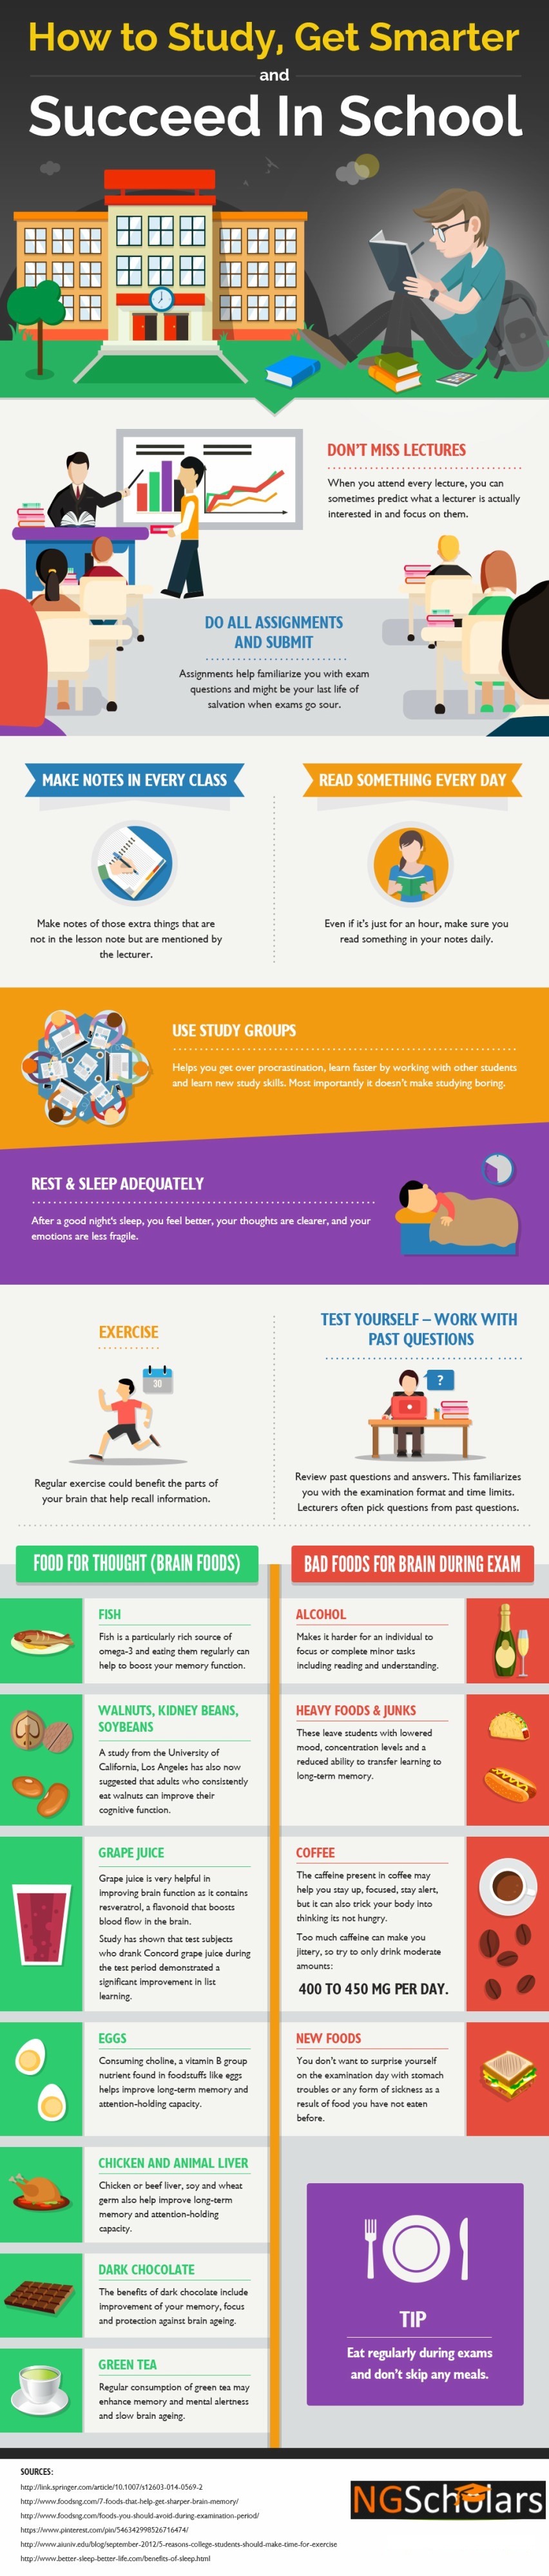 How To Get Smarter Study And Succeed In School Infographic